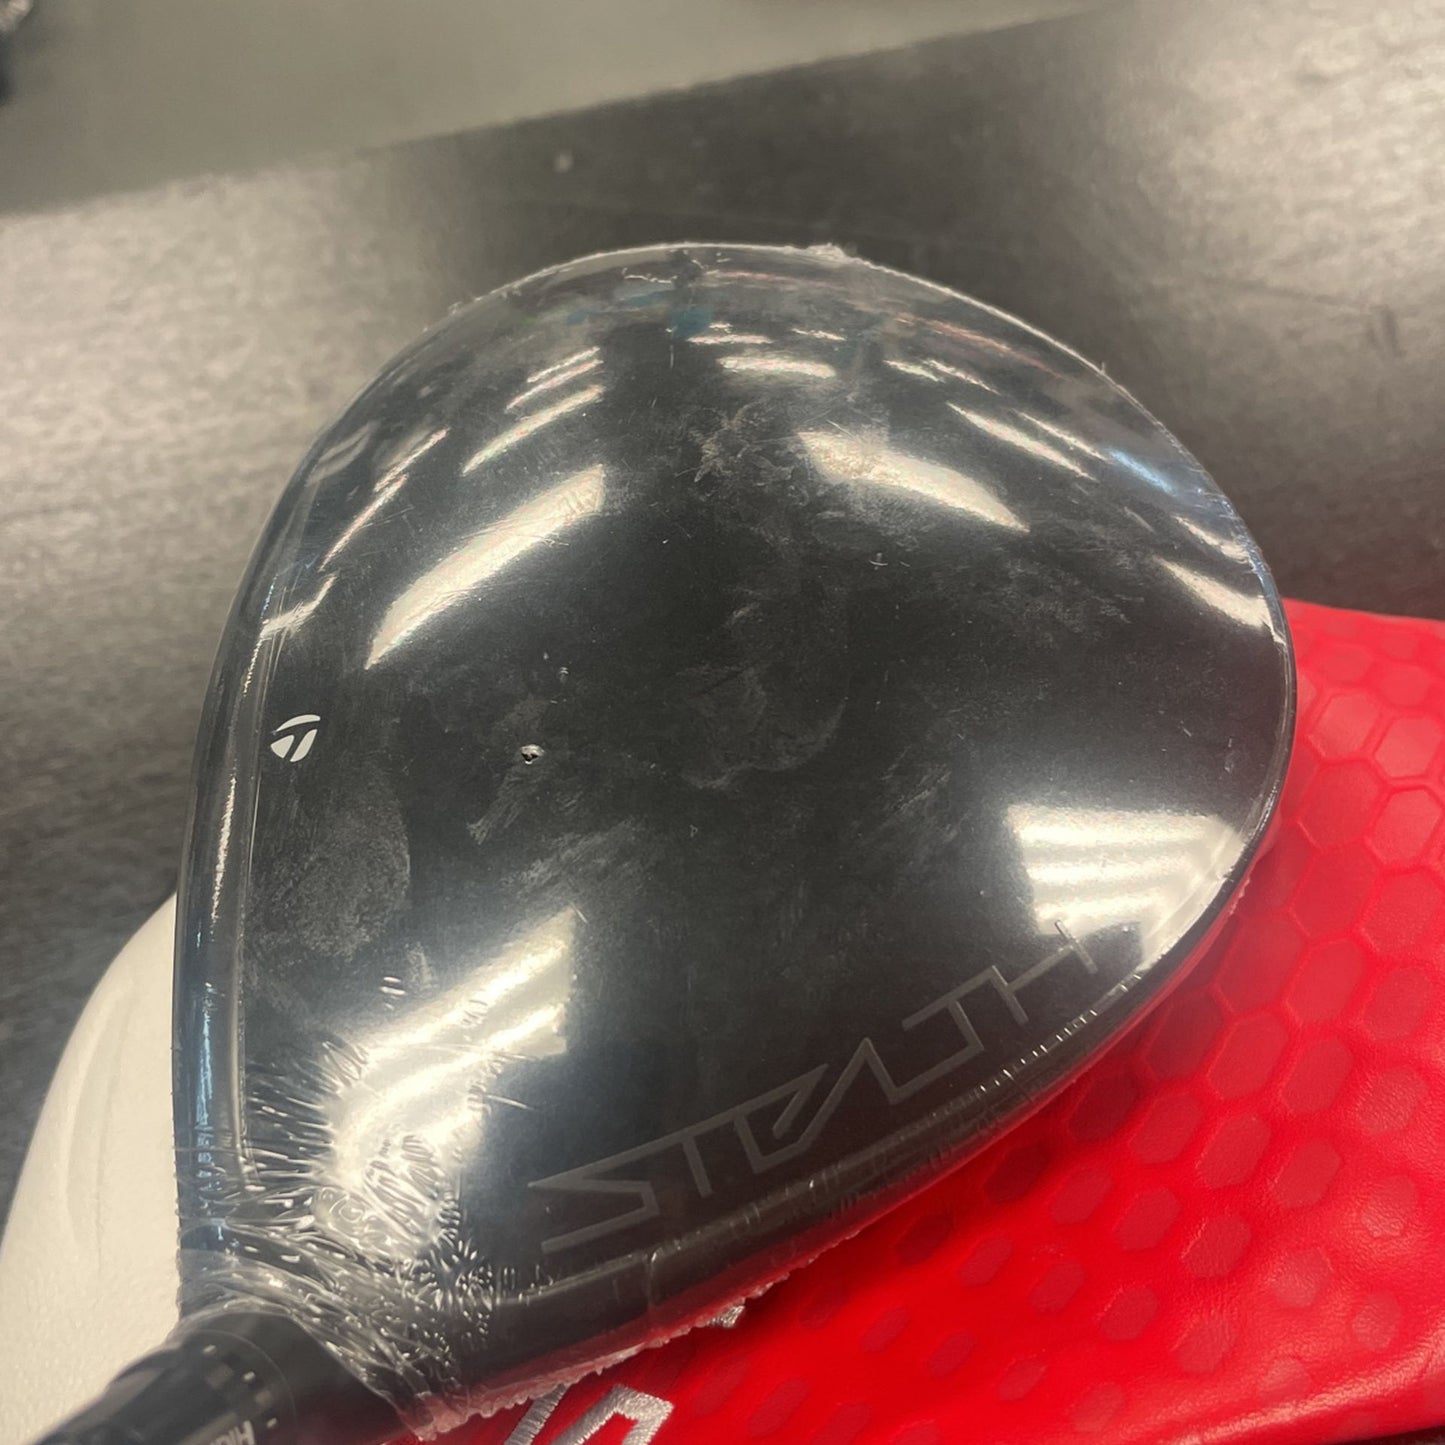 Taylormade-Stealth-2-plus-driver-9-degree-right-hand--stiff-flex-with-headcover